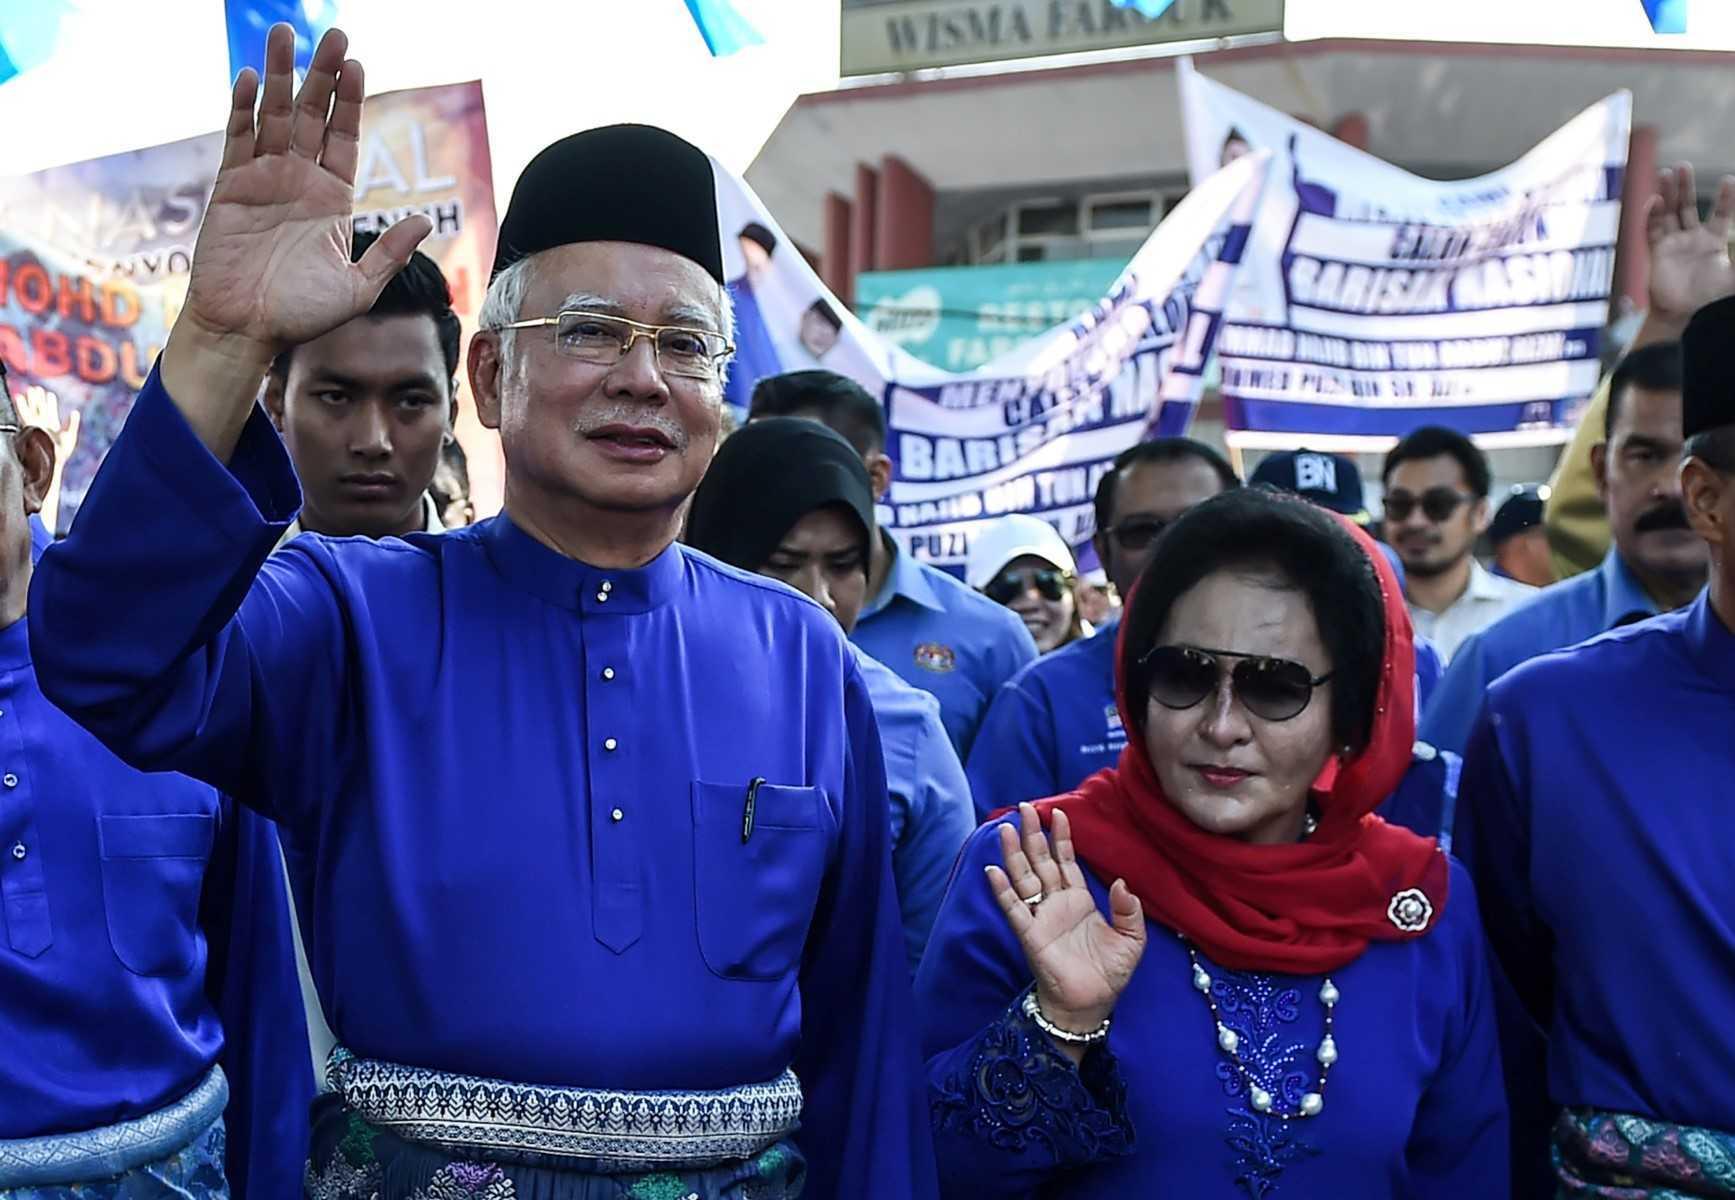 Former prime minister Najib Razak and his wife Rosmah Mansor wave as they arrive at the Pekan nomination centre during the 2018 general election. Photo: AFP